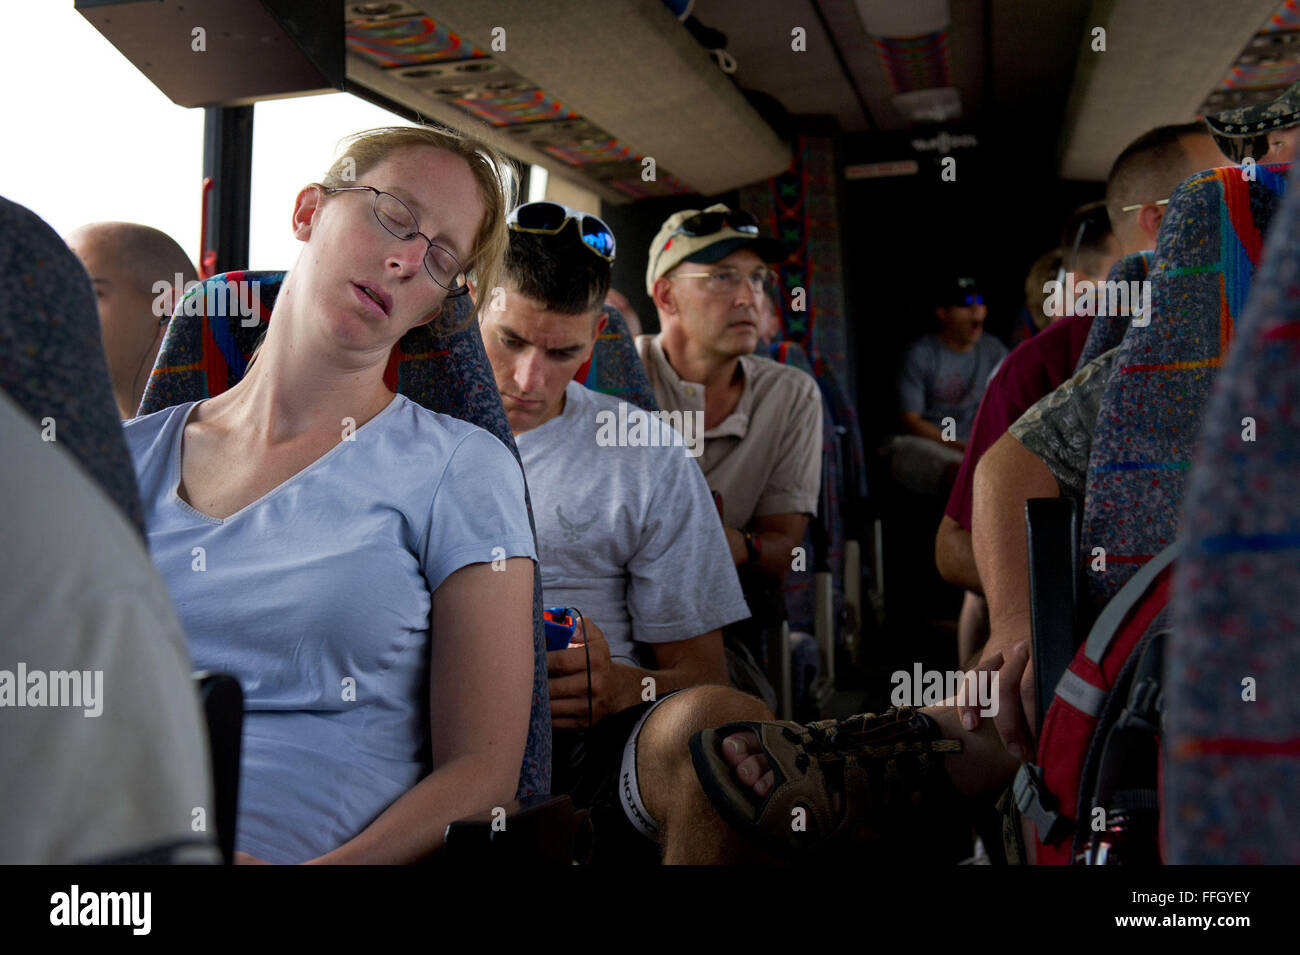 Kendra Johnson sleeps on the three-hour bus ride from Offutt Air Force Base, Neb., to Sioux Center, Iowa, where the Register’s Annual Great Bicycle Ride Across Iowa begins. The RAGBRAI Air Force Cycle Team faced seven days of extreme heat, humidity, long rides, and camping in city parks and abandoned lots. Johnson is a military spouse and support crew member. Stock Photo